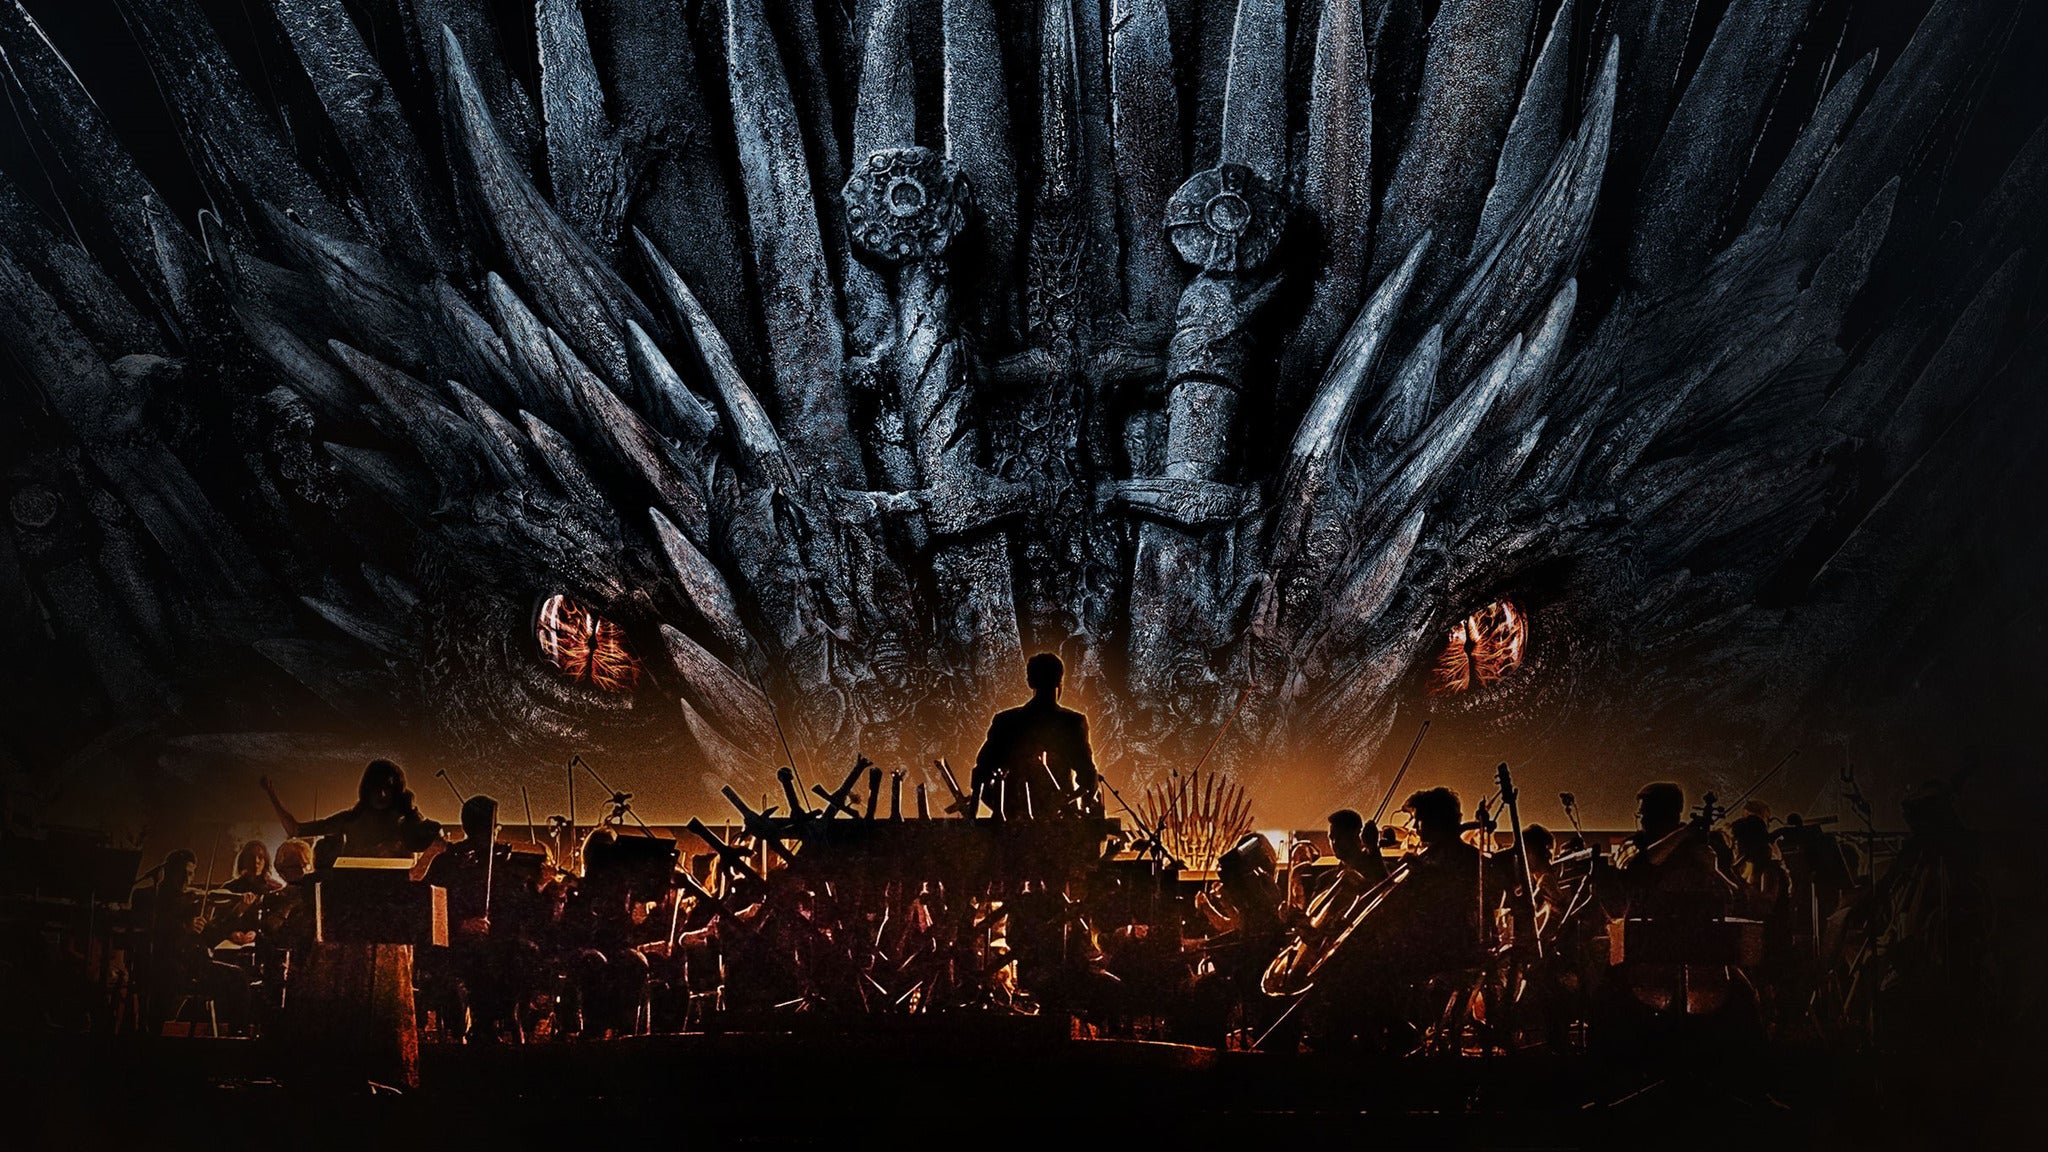 Game Of Thrones Live Concert Experience - Music By Ramin Djawadi in Alpharetta promo photo for Citi® Cardmember presale offer code